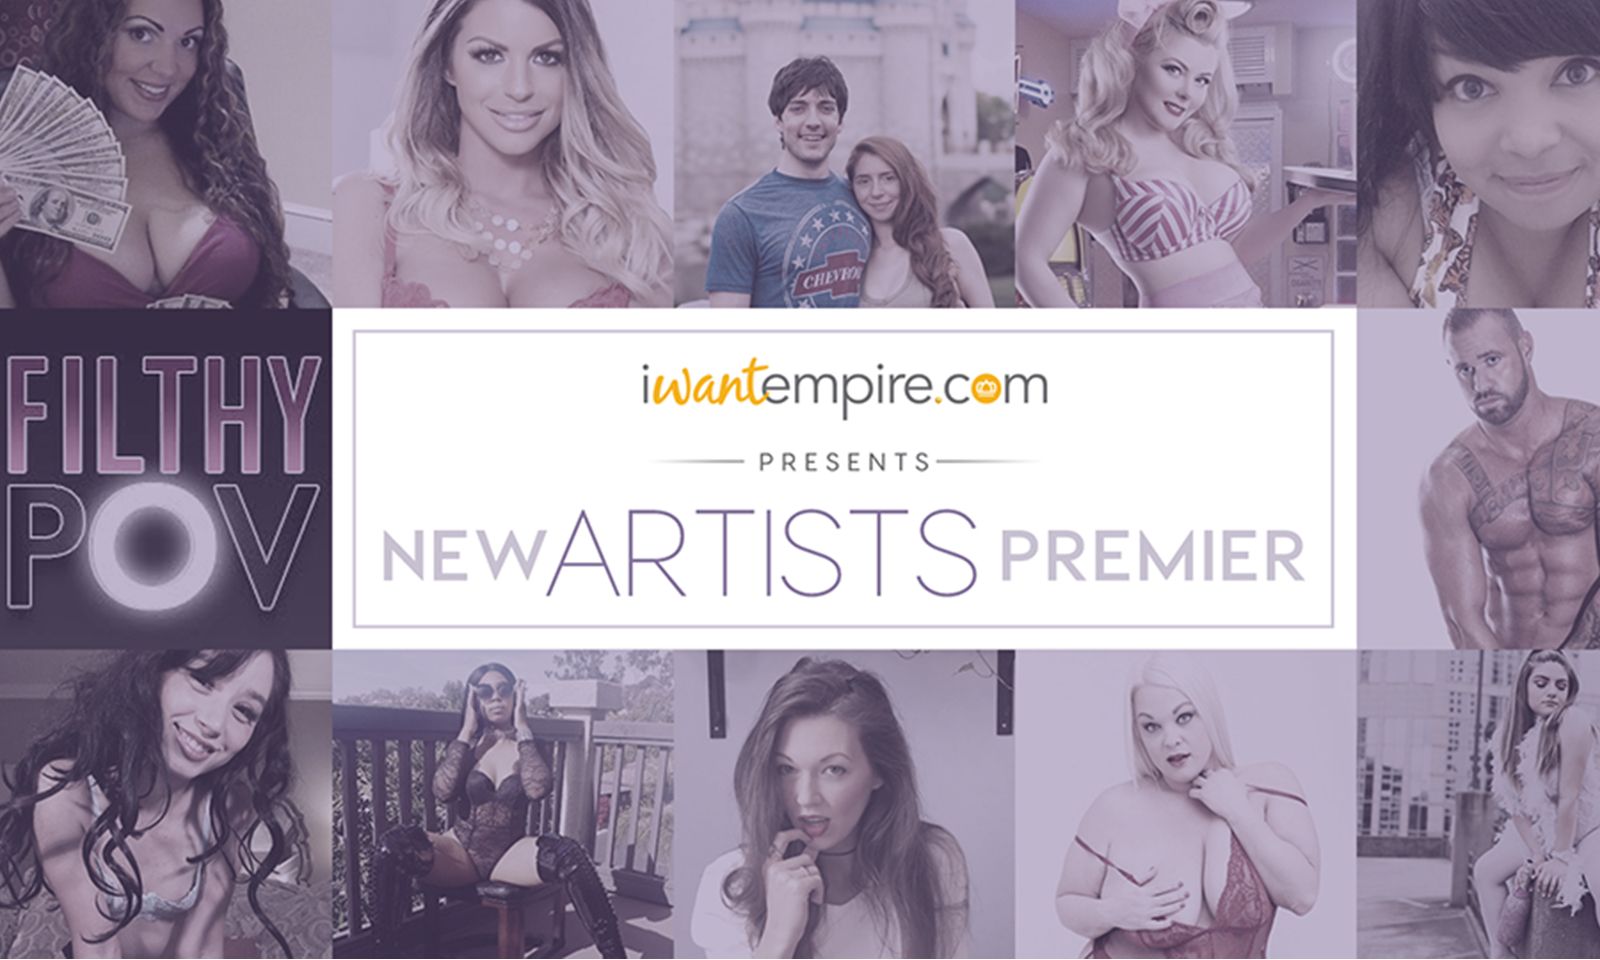 iWantEmpire's Latest Group of Artists Debuts On Its Sites